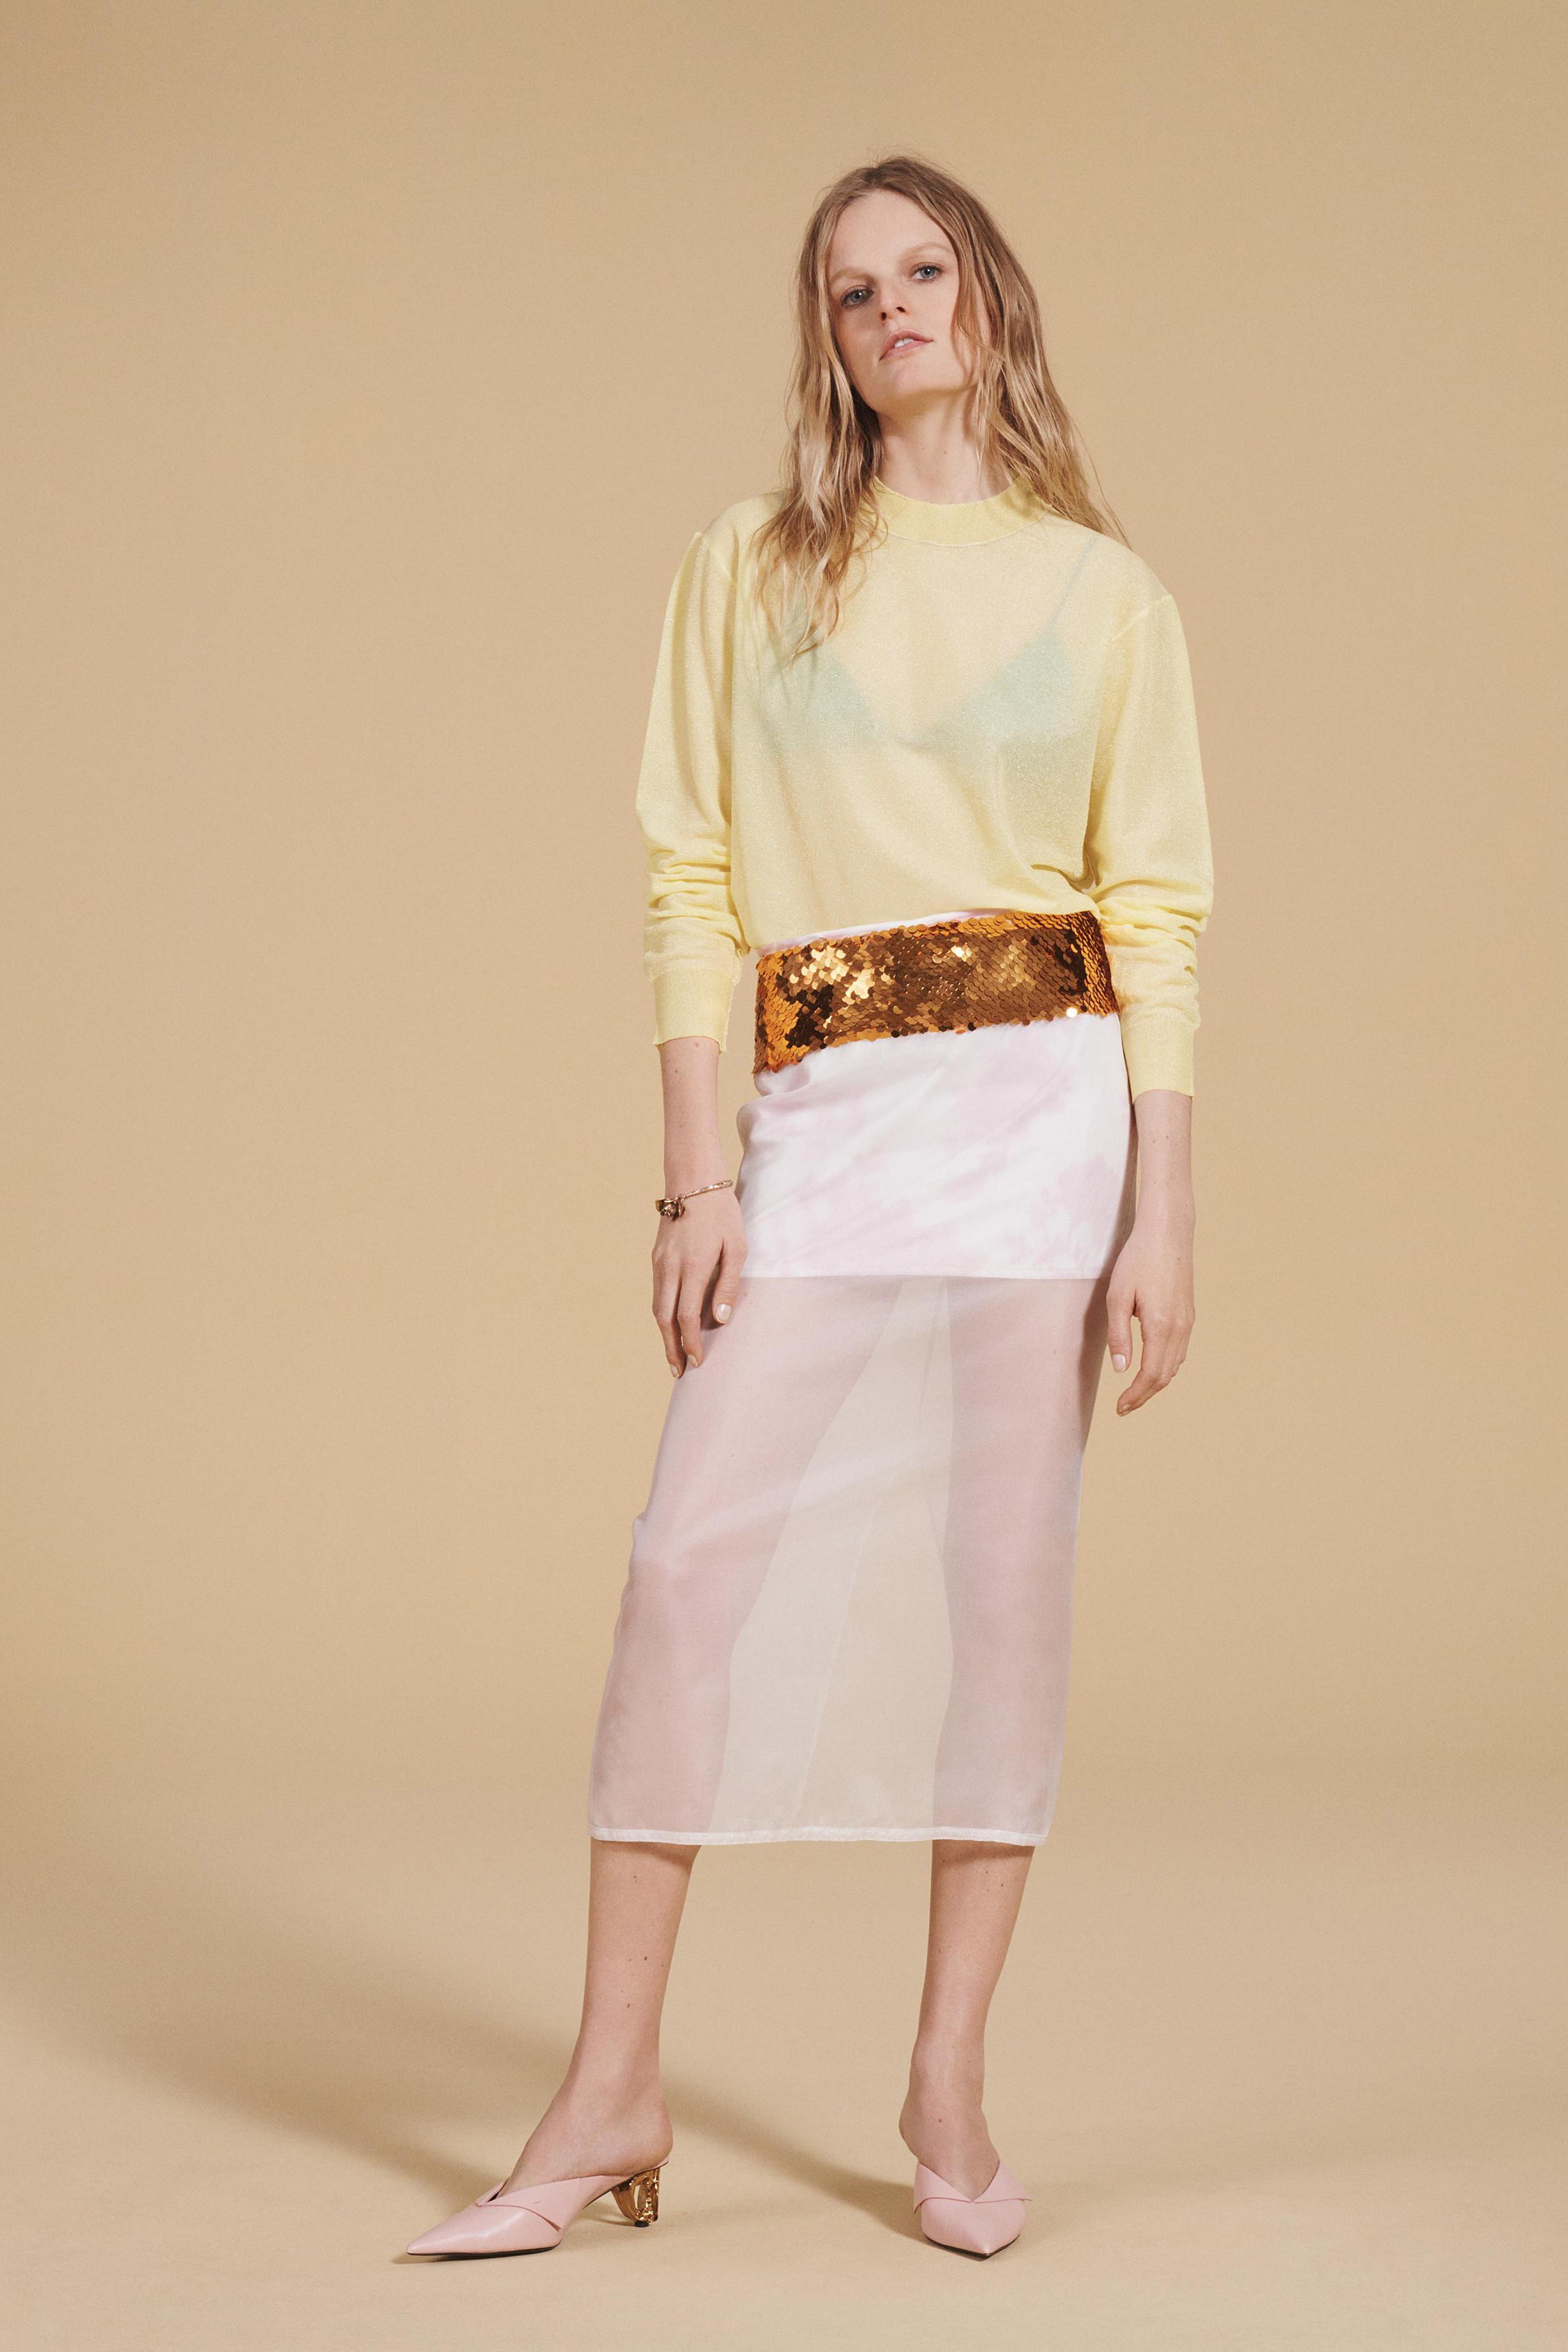 Women's Sequin Skirts, Explore our New Arrivals